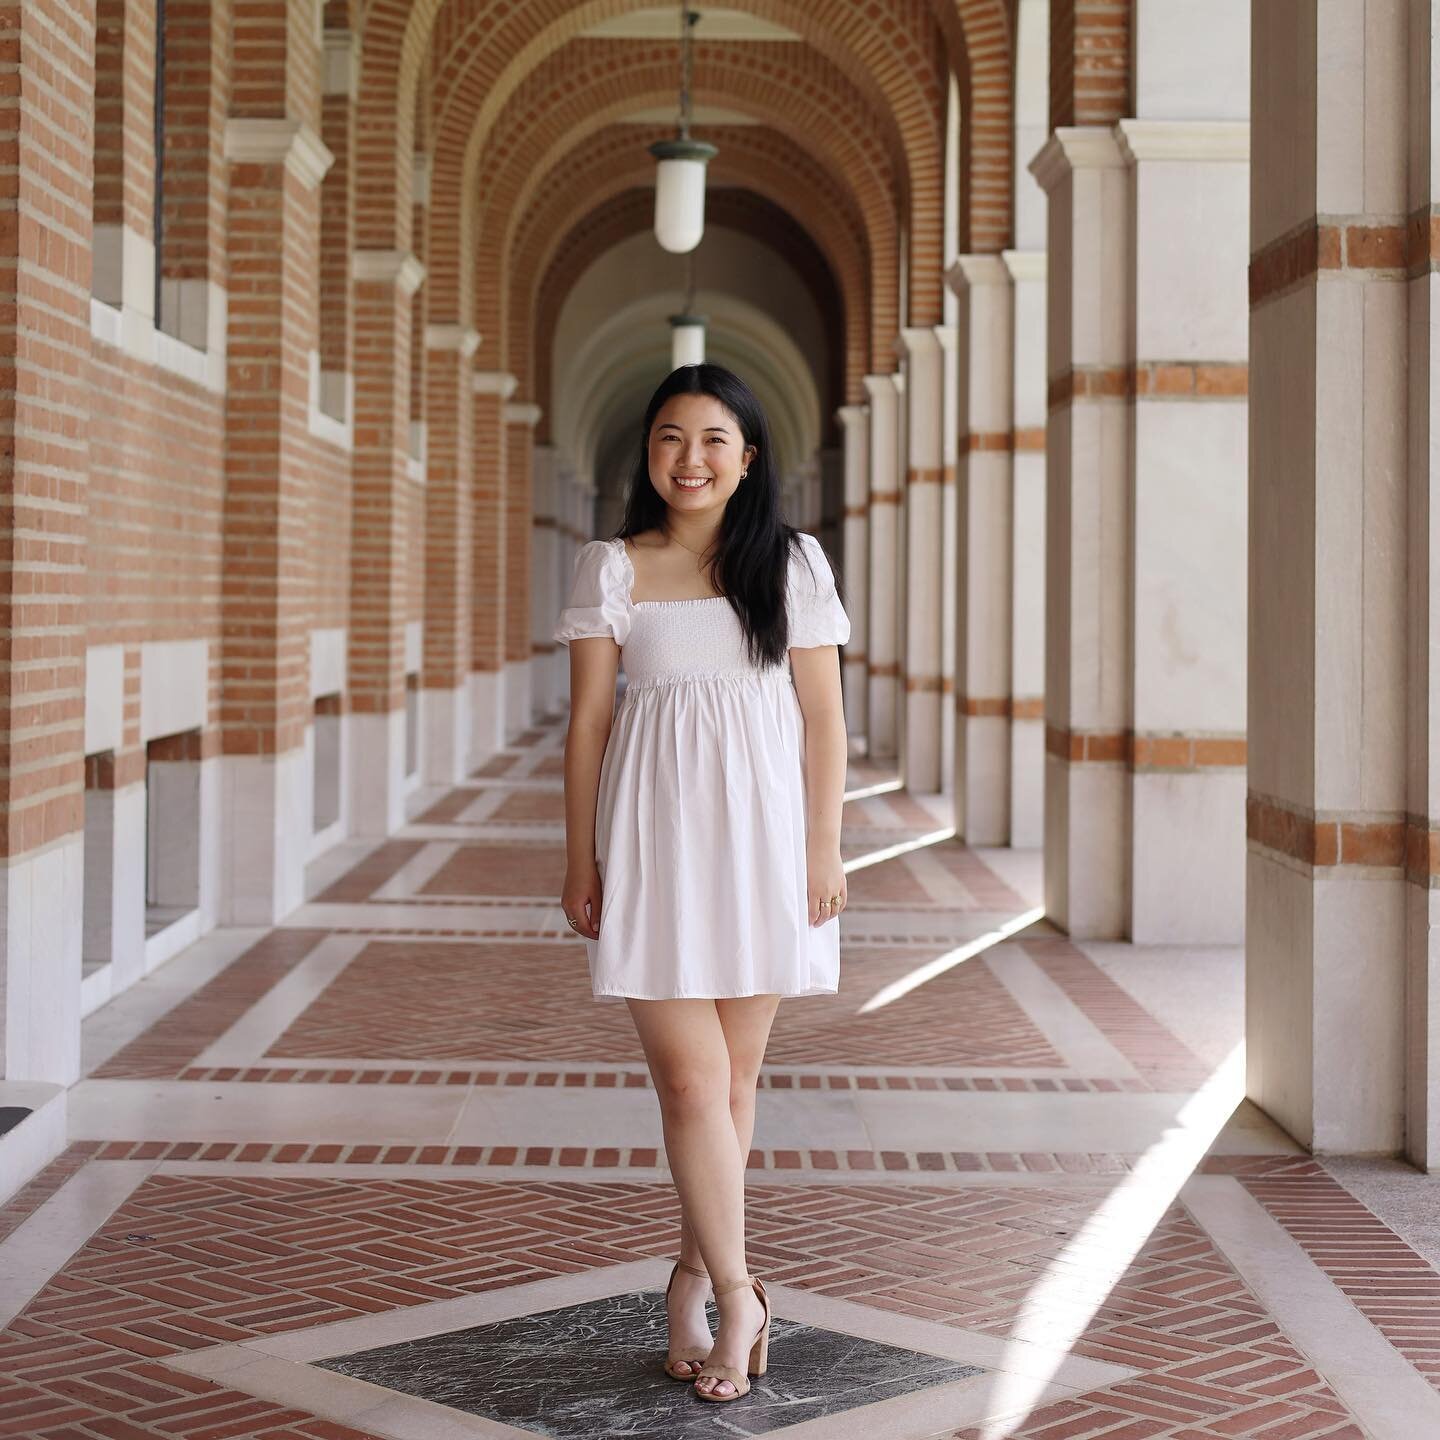 34 DAYS UNTIL O-WEEK🫶😆
The coords will introducing ourselves over the next few days!!

My name is Lynn-Chi Nguyen (The L part of LJJ) and I&rsquo;m a rising junior, majoring in Health Sciences and minoring in Medical Humanities on the pre-med track